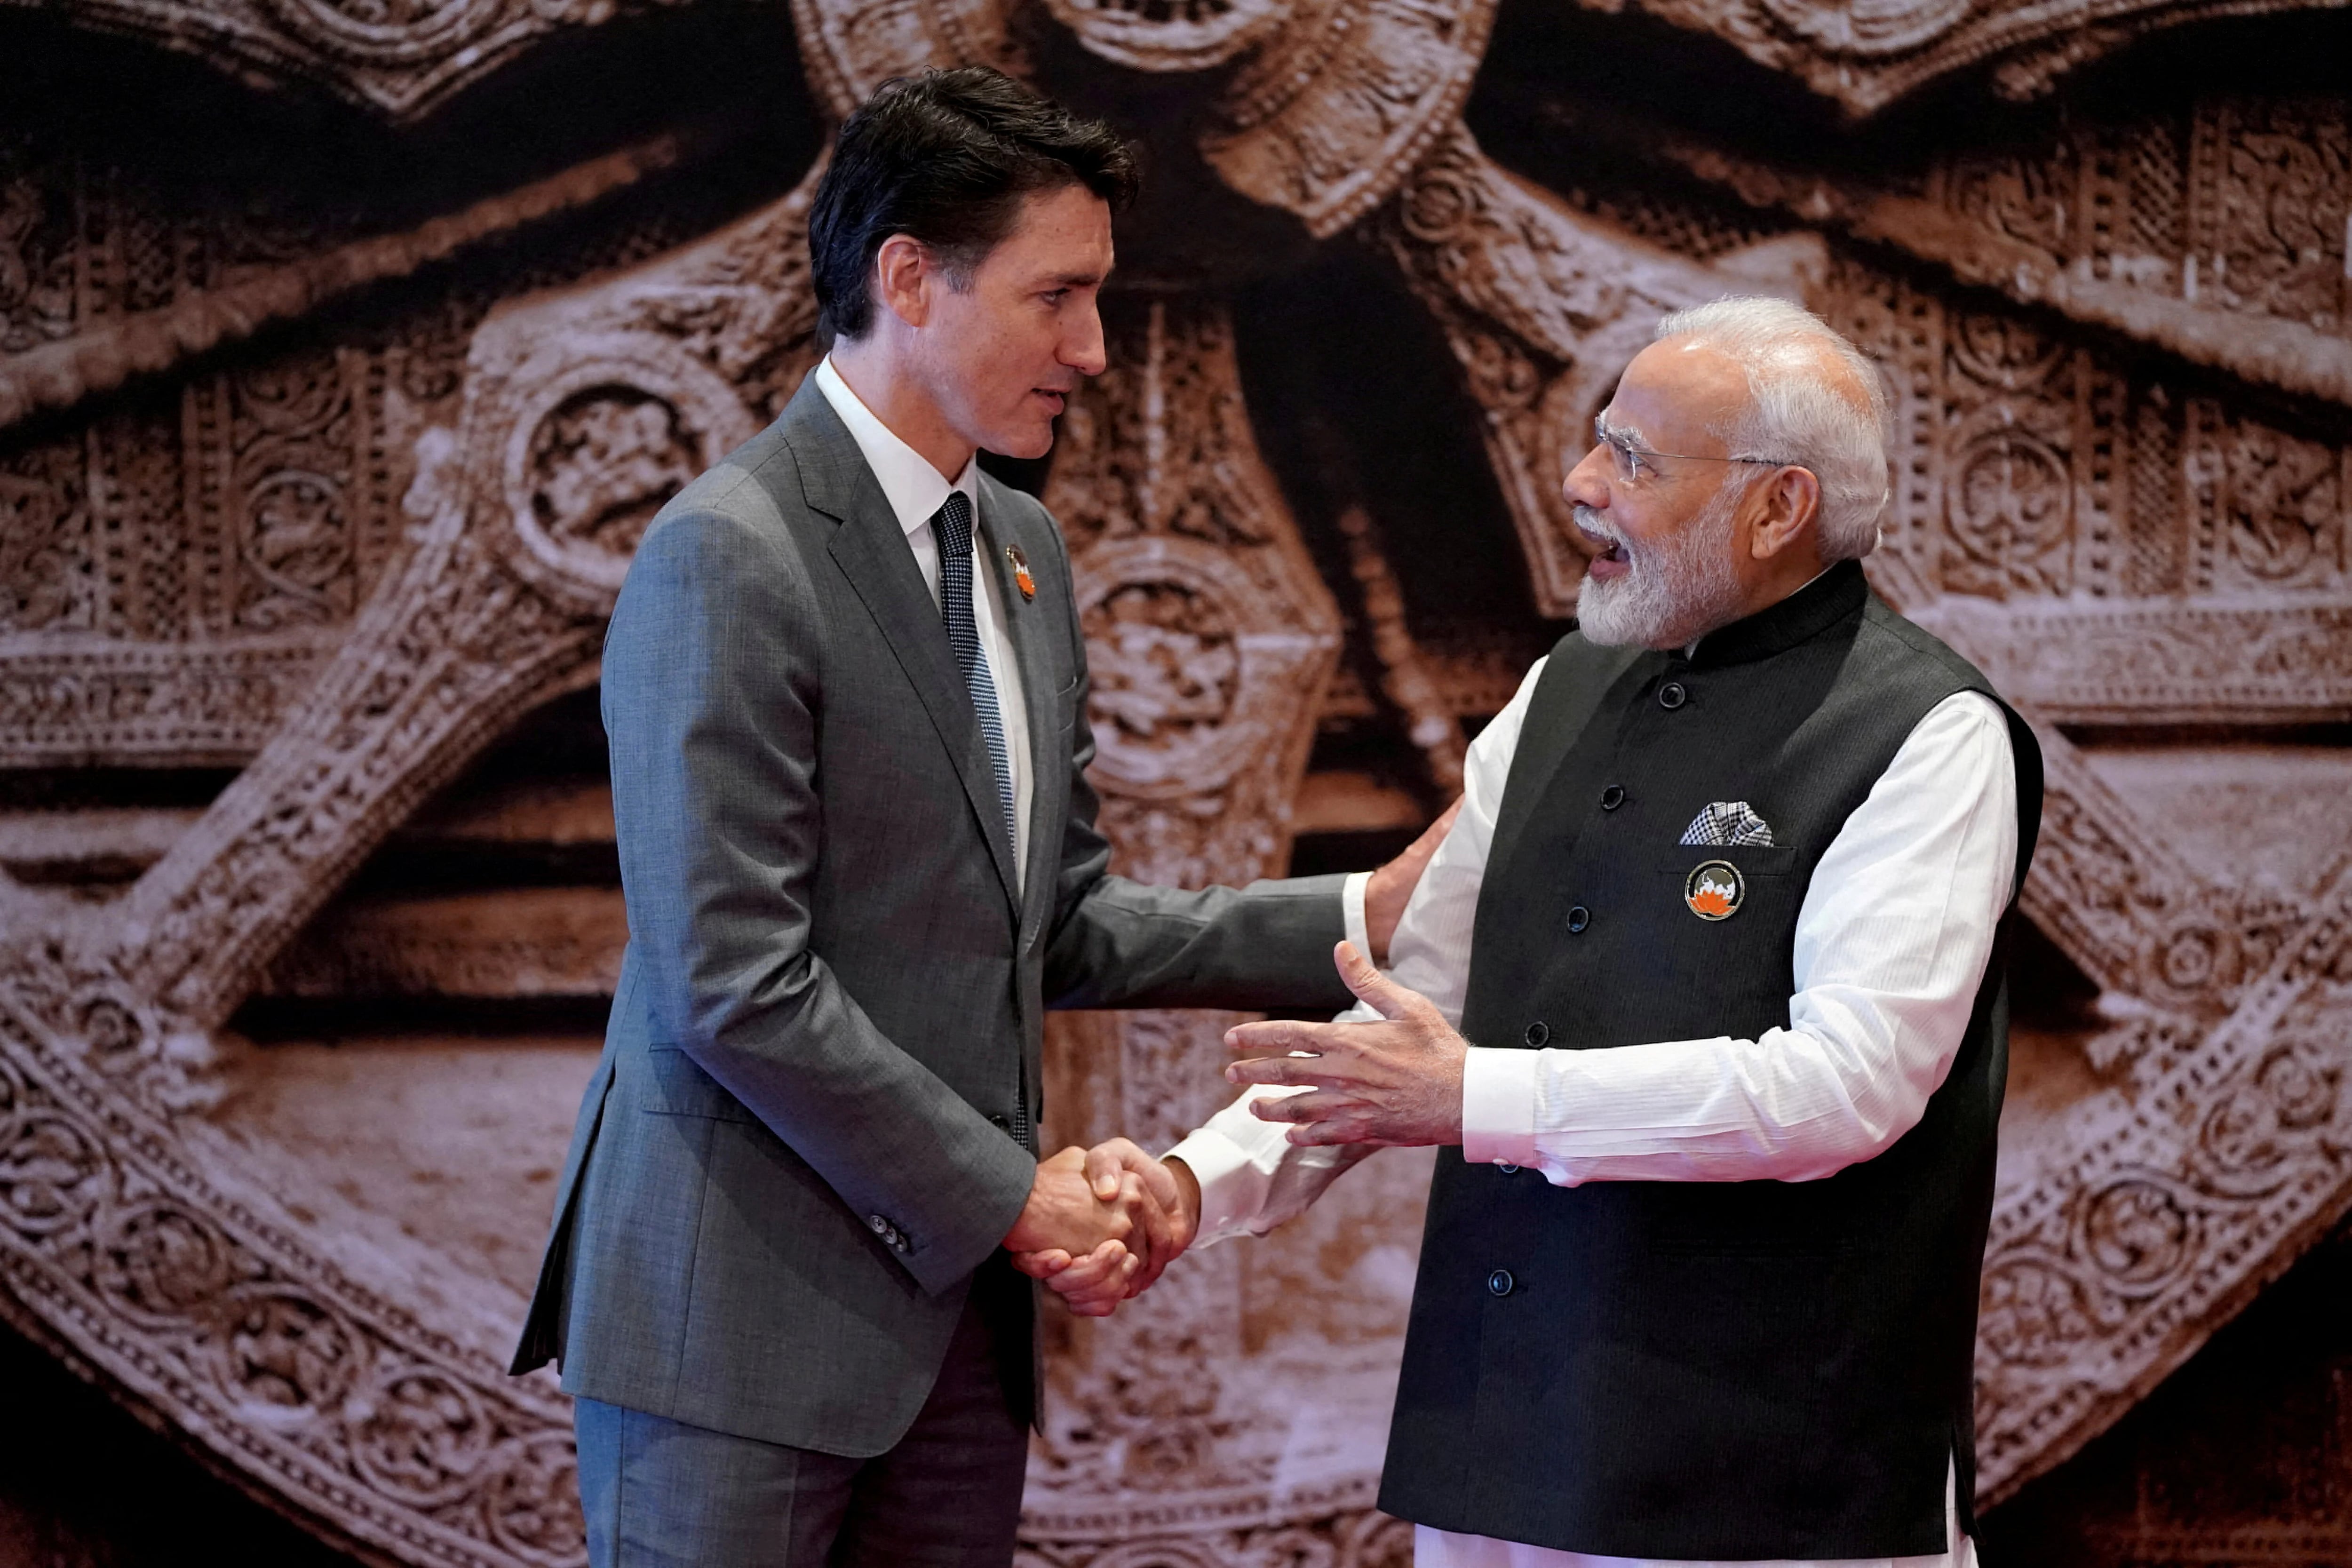 FILE PHOTO: Indian Prime Minister Narendra Modi welcomes Canada Prime Minister Justin Trudeau upon his arrival at Bharat Mandapam convention center for the G20 Summit, in New Delhi, India, Saturday, Sept. 9, 2023. Evan Vucci/Pool via REUTERS//File Photo